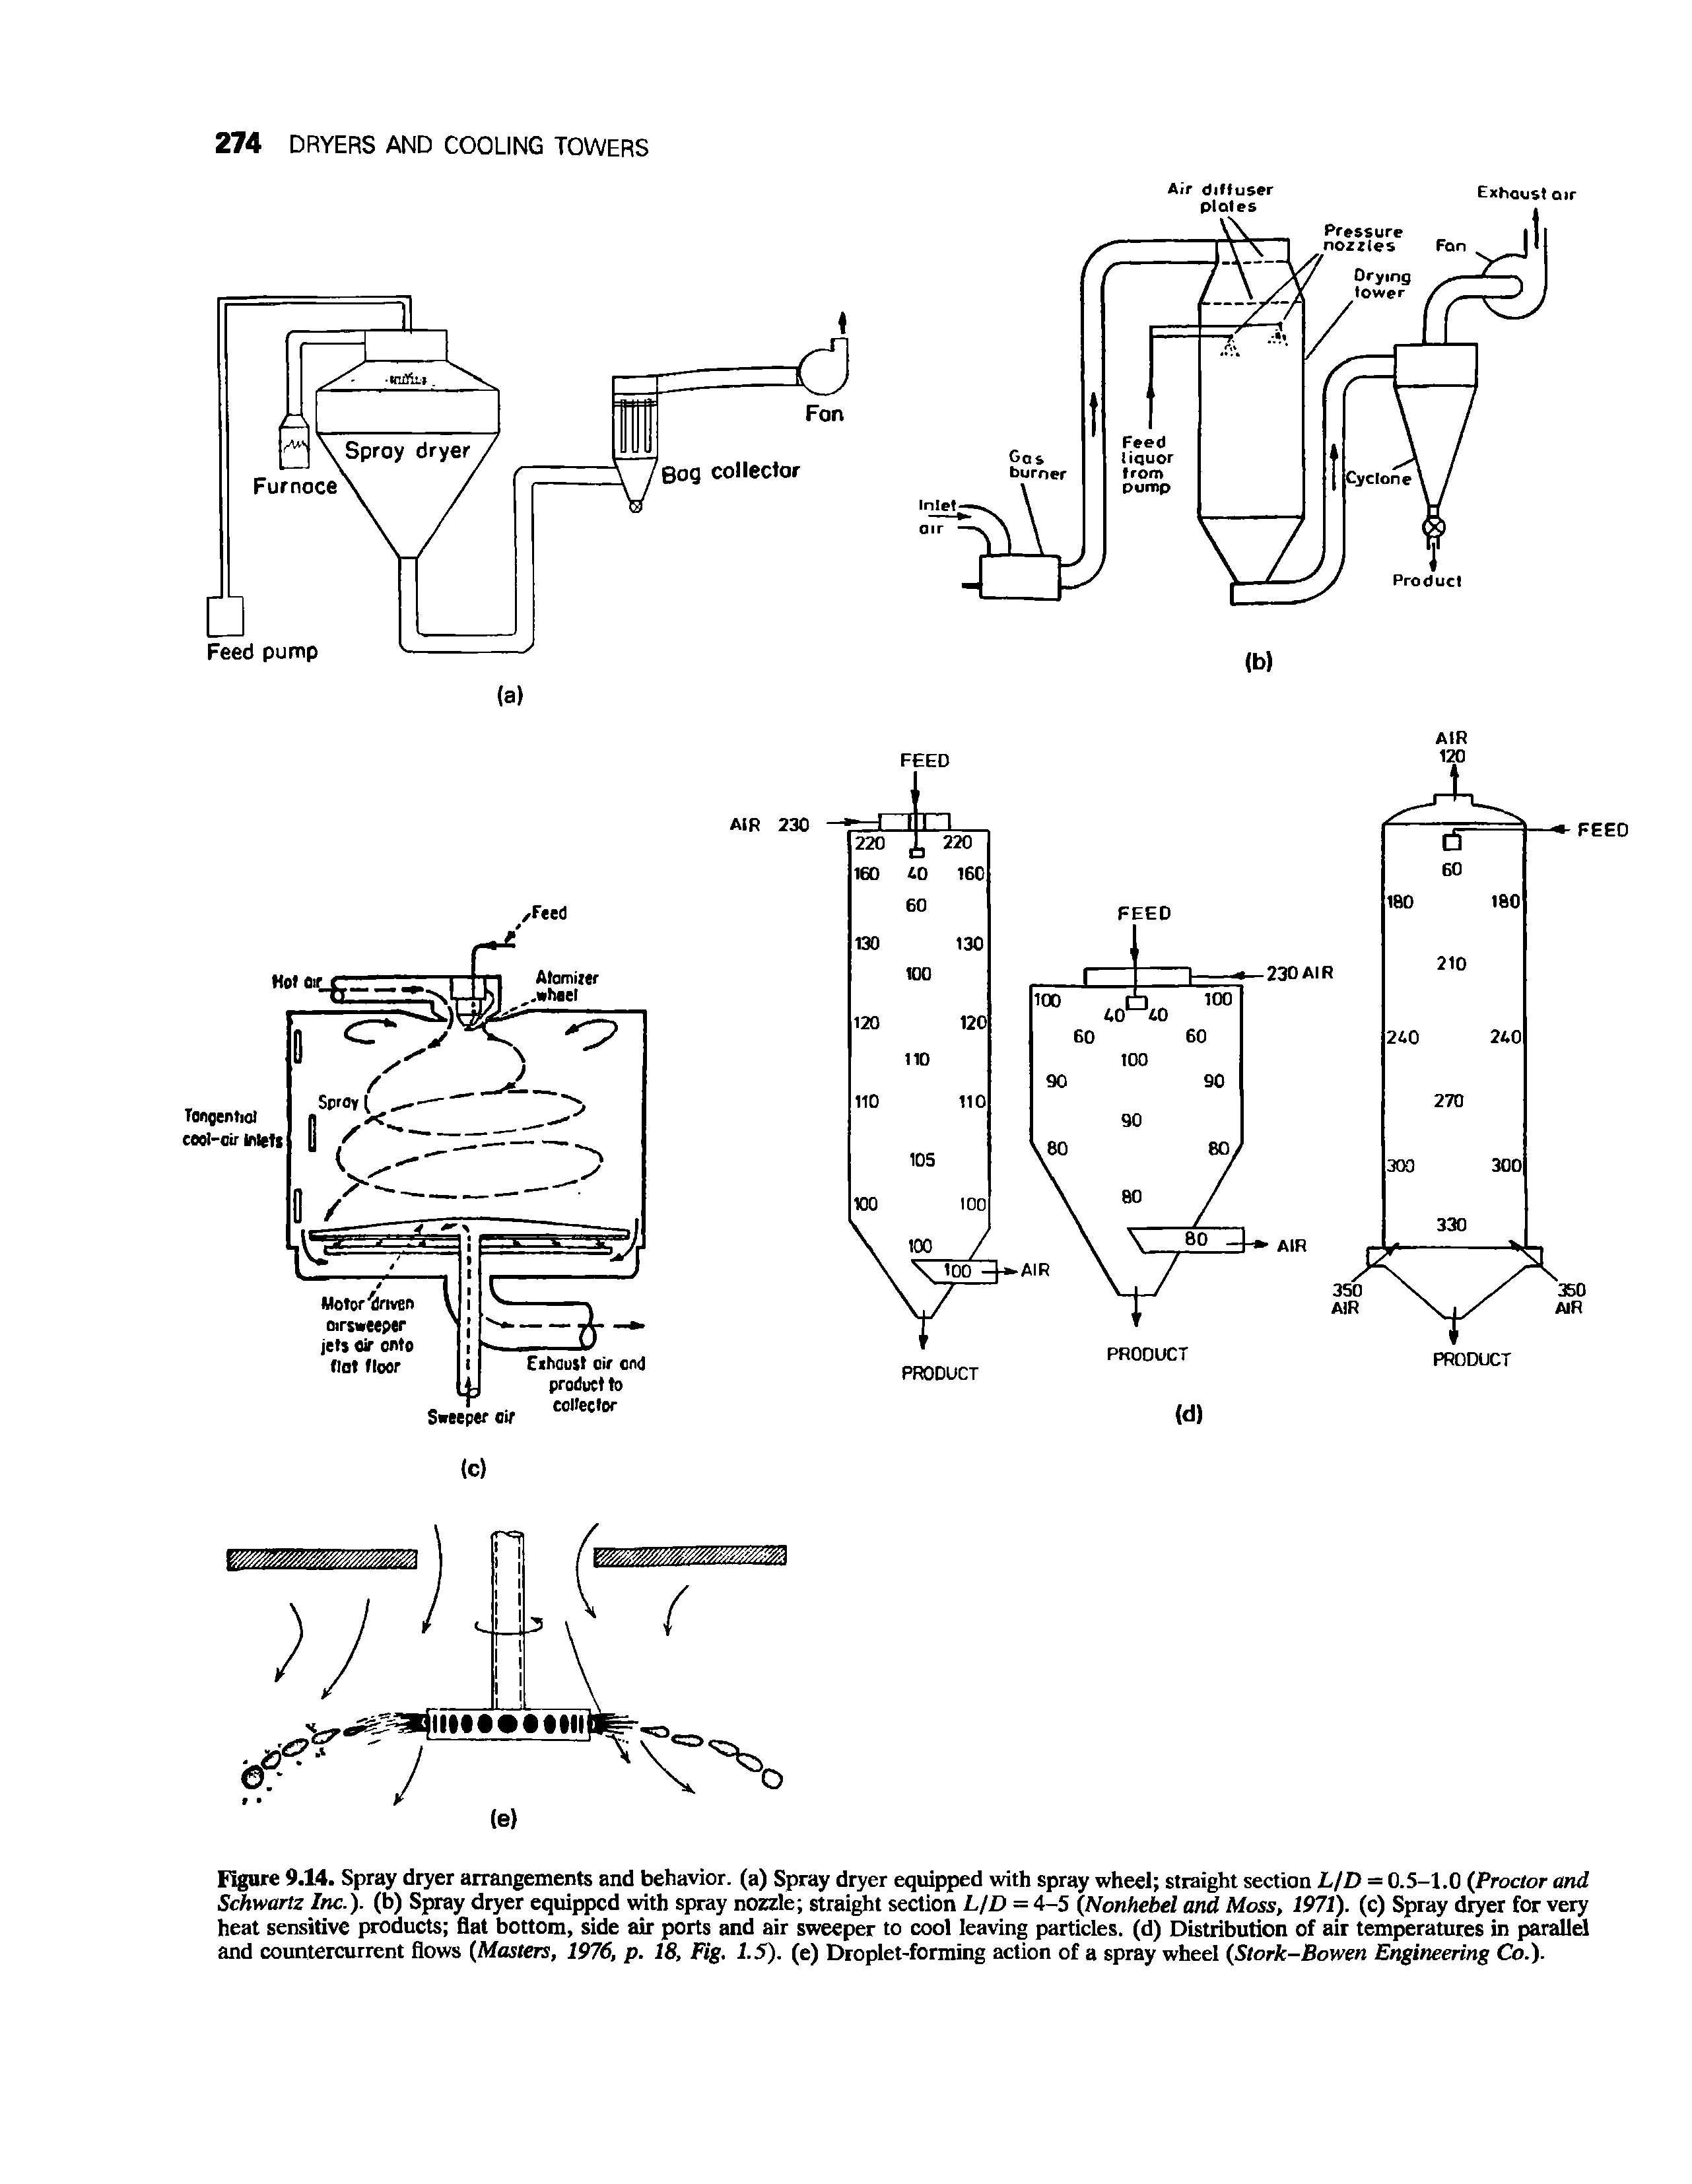 Figure 9.14. Spray dryer arrangements and behavior, (a) Spray dryer equipped with spray wheel straight section L/D = 0.5-1.0 (Proctor and Schwartz Inc.), (b) Spray dryer equipped with spray nozzle straight section L/D = 4-5 (Nonhebel and Moss, 1971). (c) Spray dryer for very heat sensitive products flat bottom, side air ports and air sweeper to cool leaving particles, (d) Distribution of air temperatures in parallel and countercurrent flows (Masters, 1976, p. 18, Fig. 1.5). (e) Droplet-forming action of a spray wheel (Stork-Bowen Engineering Co.).